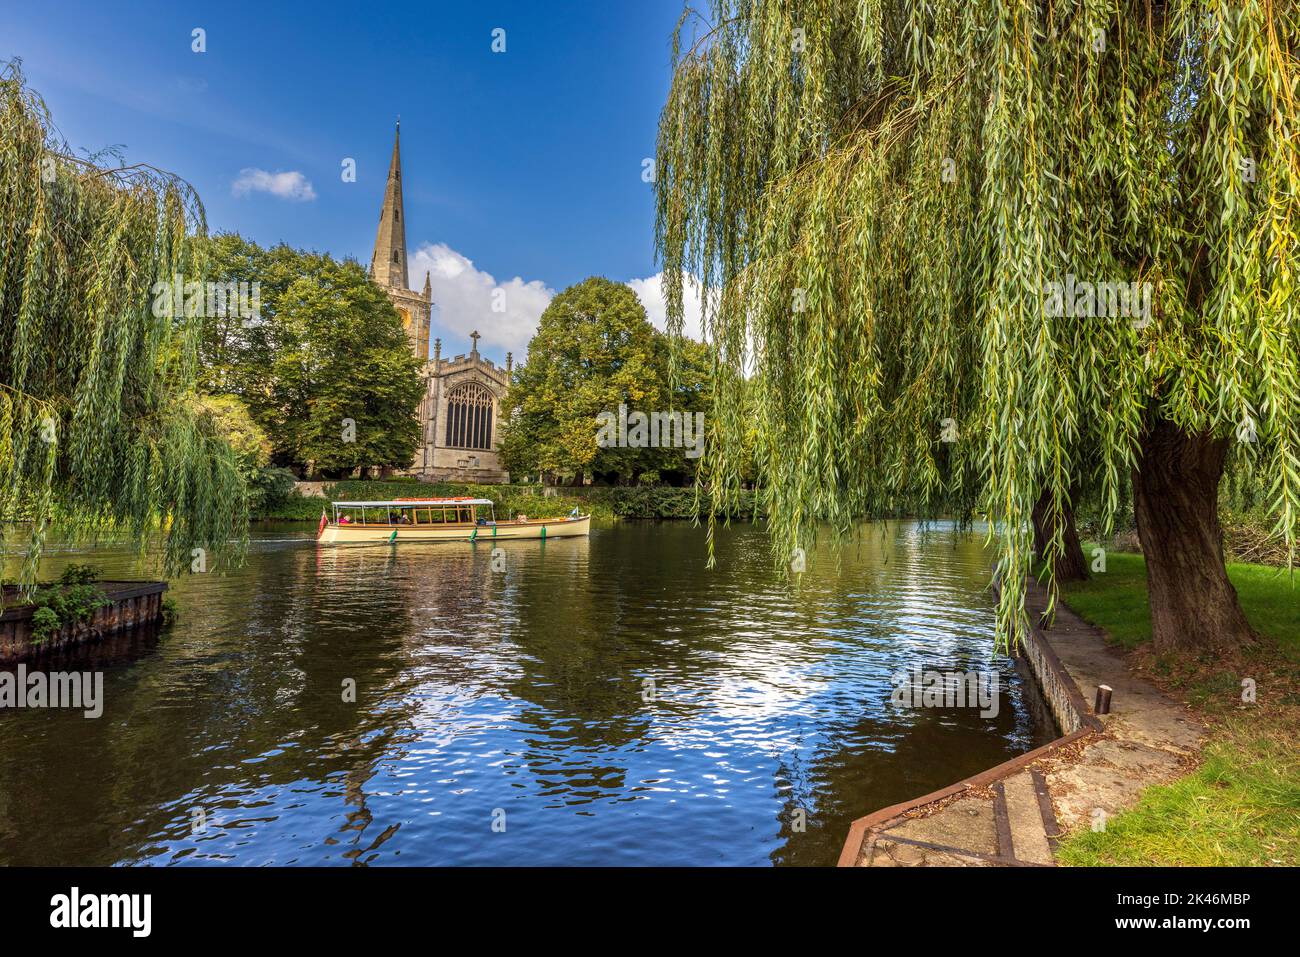 A River Cruise boat and Holy Trinity church across the river at Stratford Upon Avon, Warwickshire, England Stock Photo